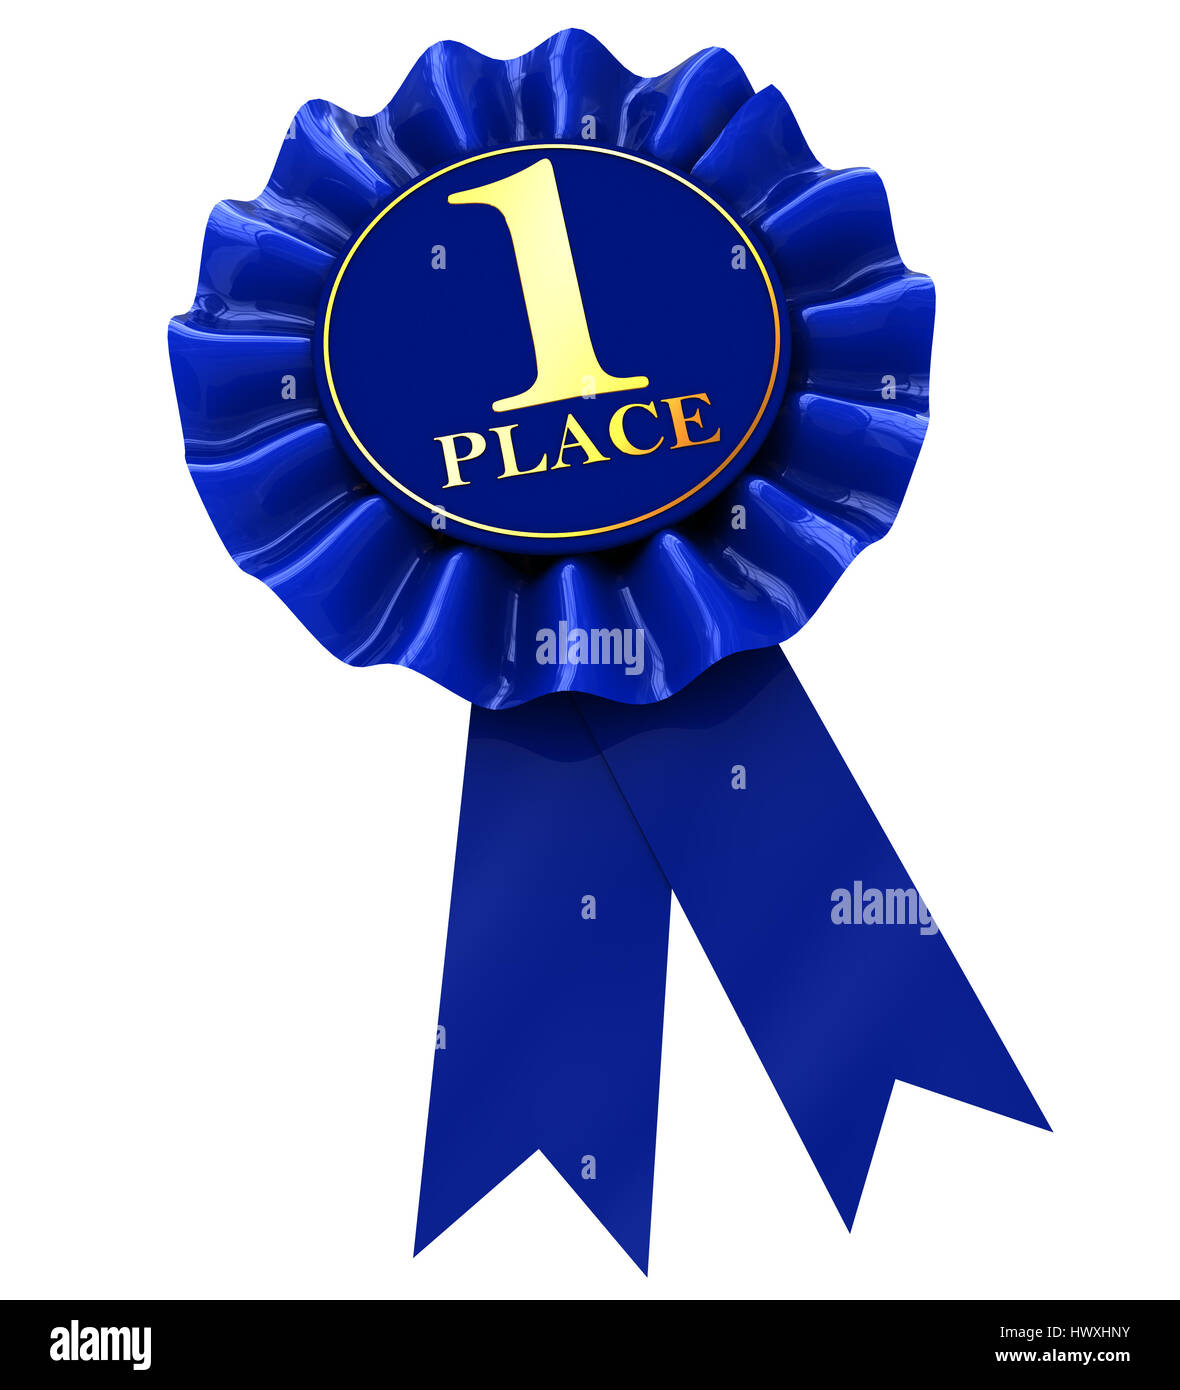 3d illustration of first place blue ribbon award, isolated over